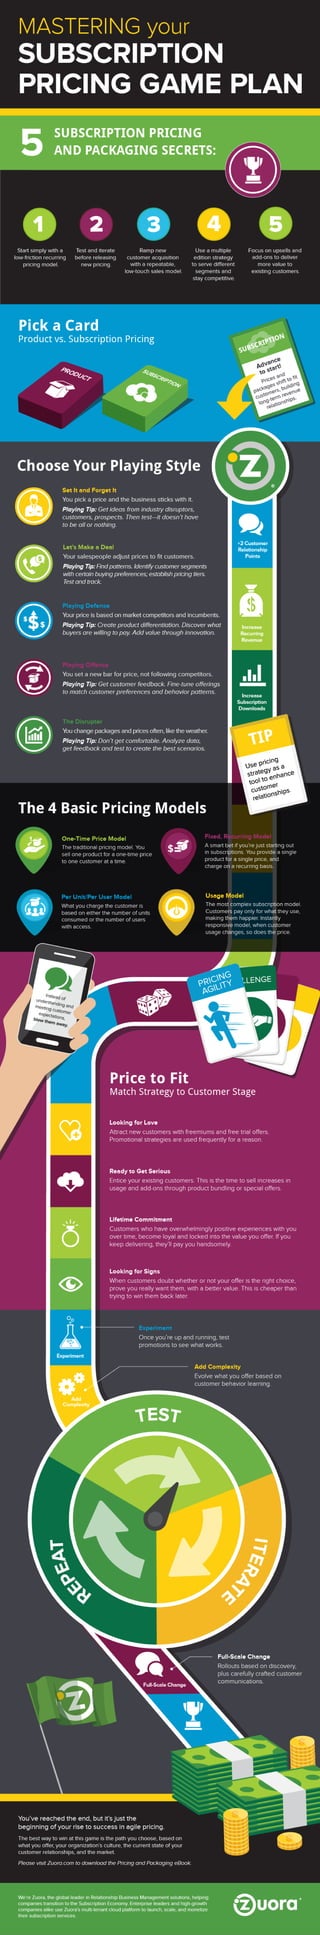 5 Secrets of Subscription Pricing Infographic